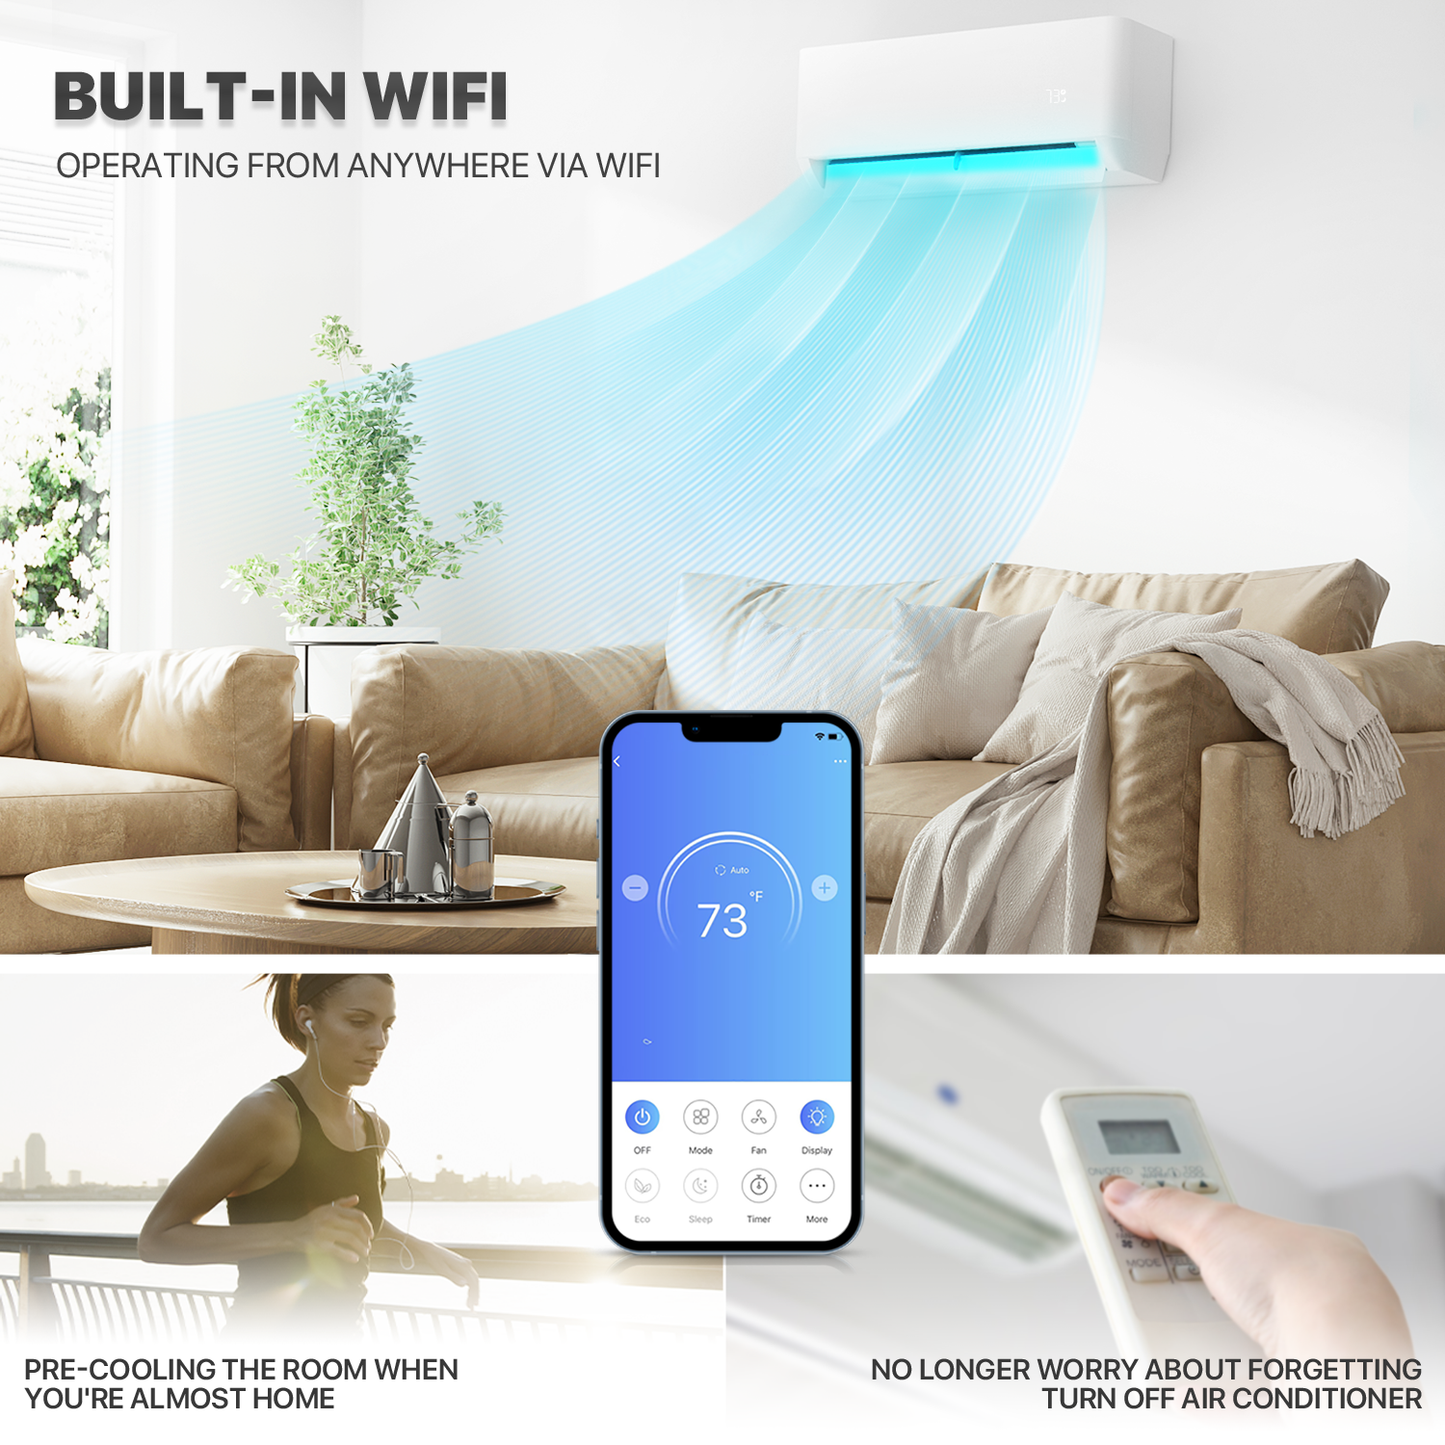 9000 BTU Split Air Conditioner - Cooling & Heating Function- WIFI APP Control - 4-in-1 filter